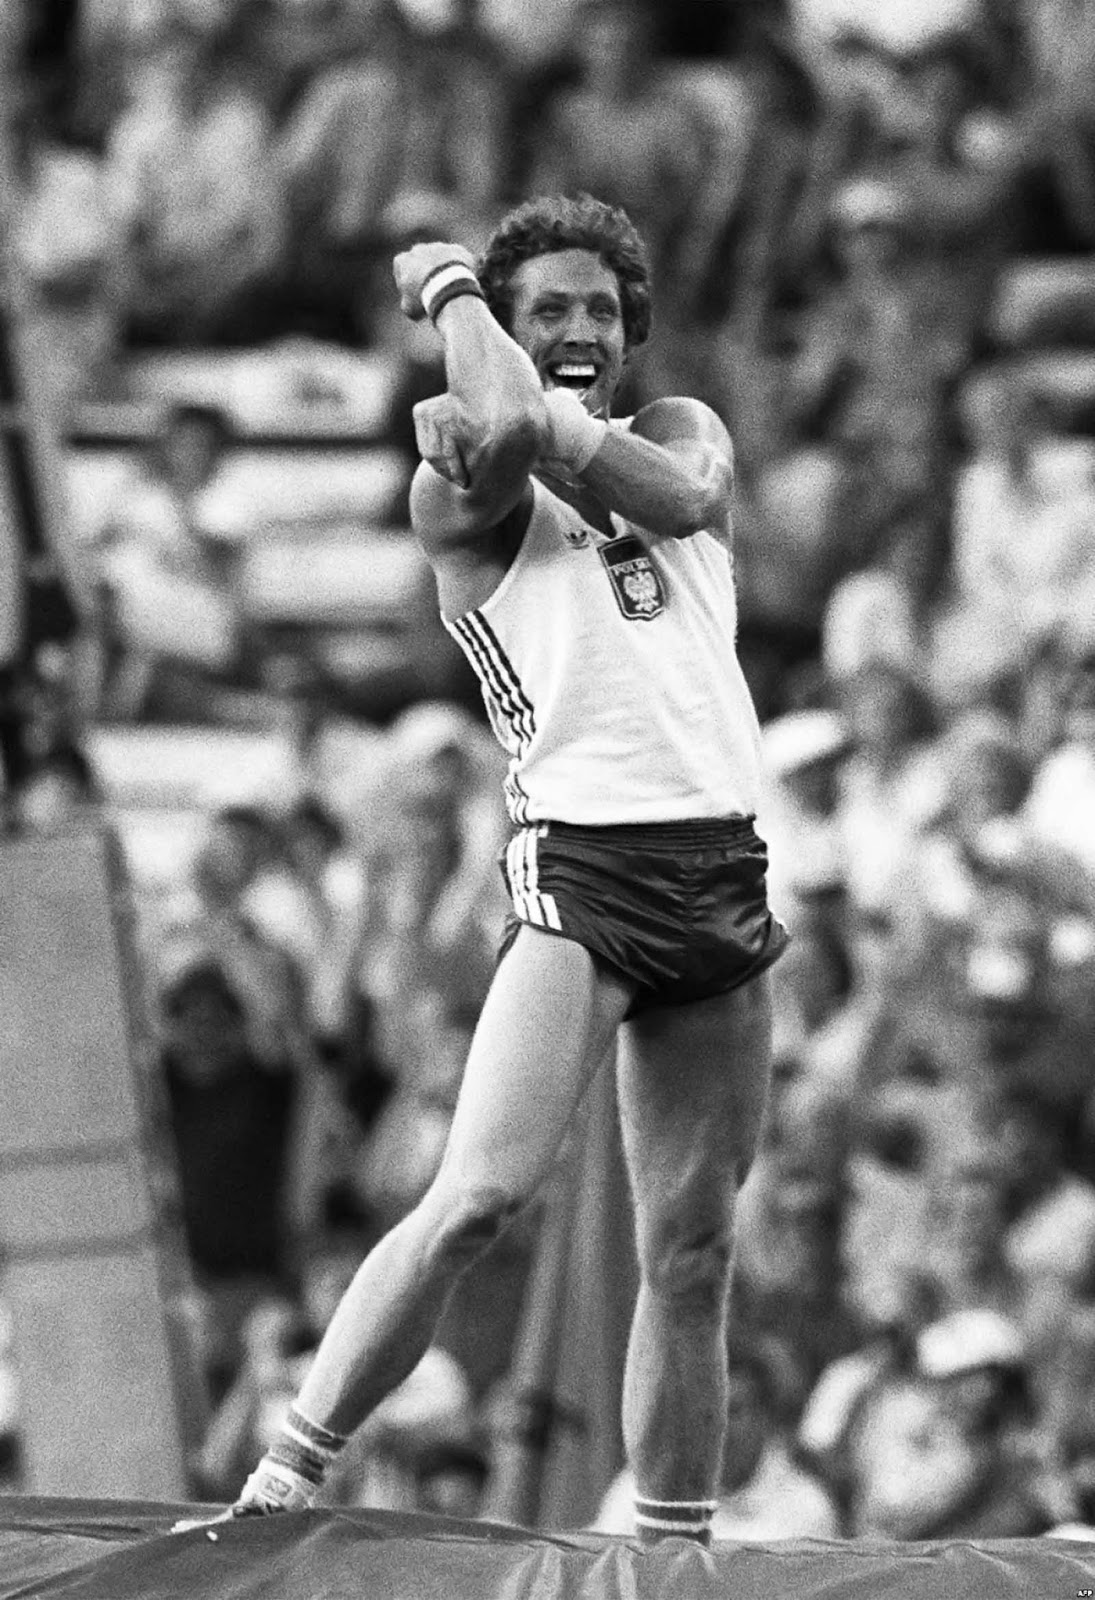 Polish pole vaulter Wladyslaw Kozakiewicz jubilates after setting a new world record in the Olympic pole vault final 30 July 1980 in Moscow and winning the gold medal.